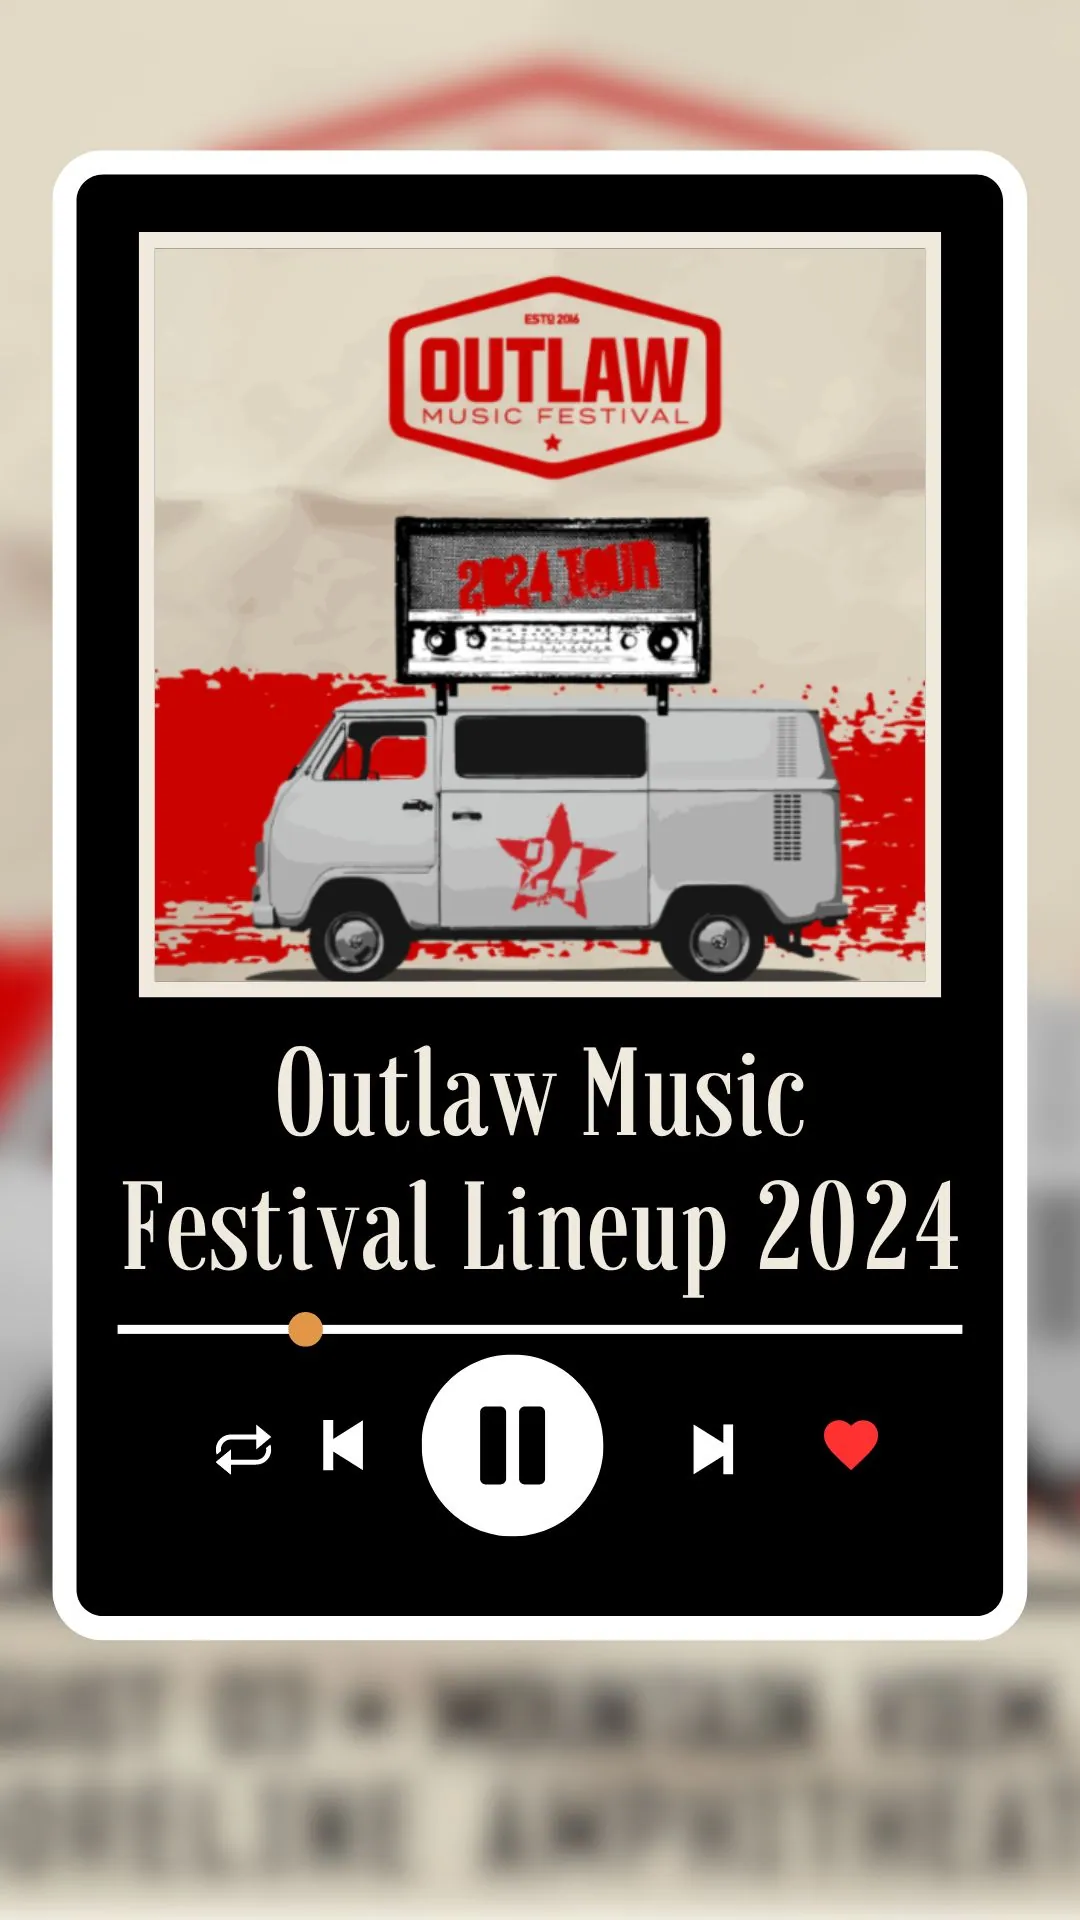 Outlaw Music Festival Lineup 2024